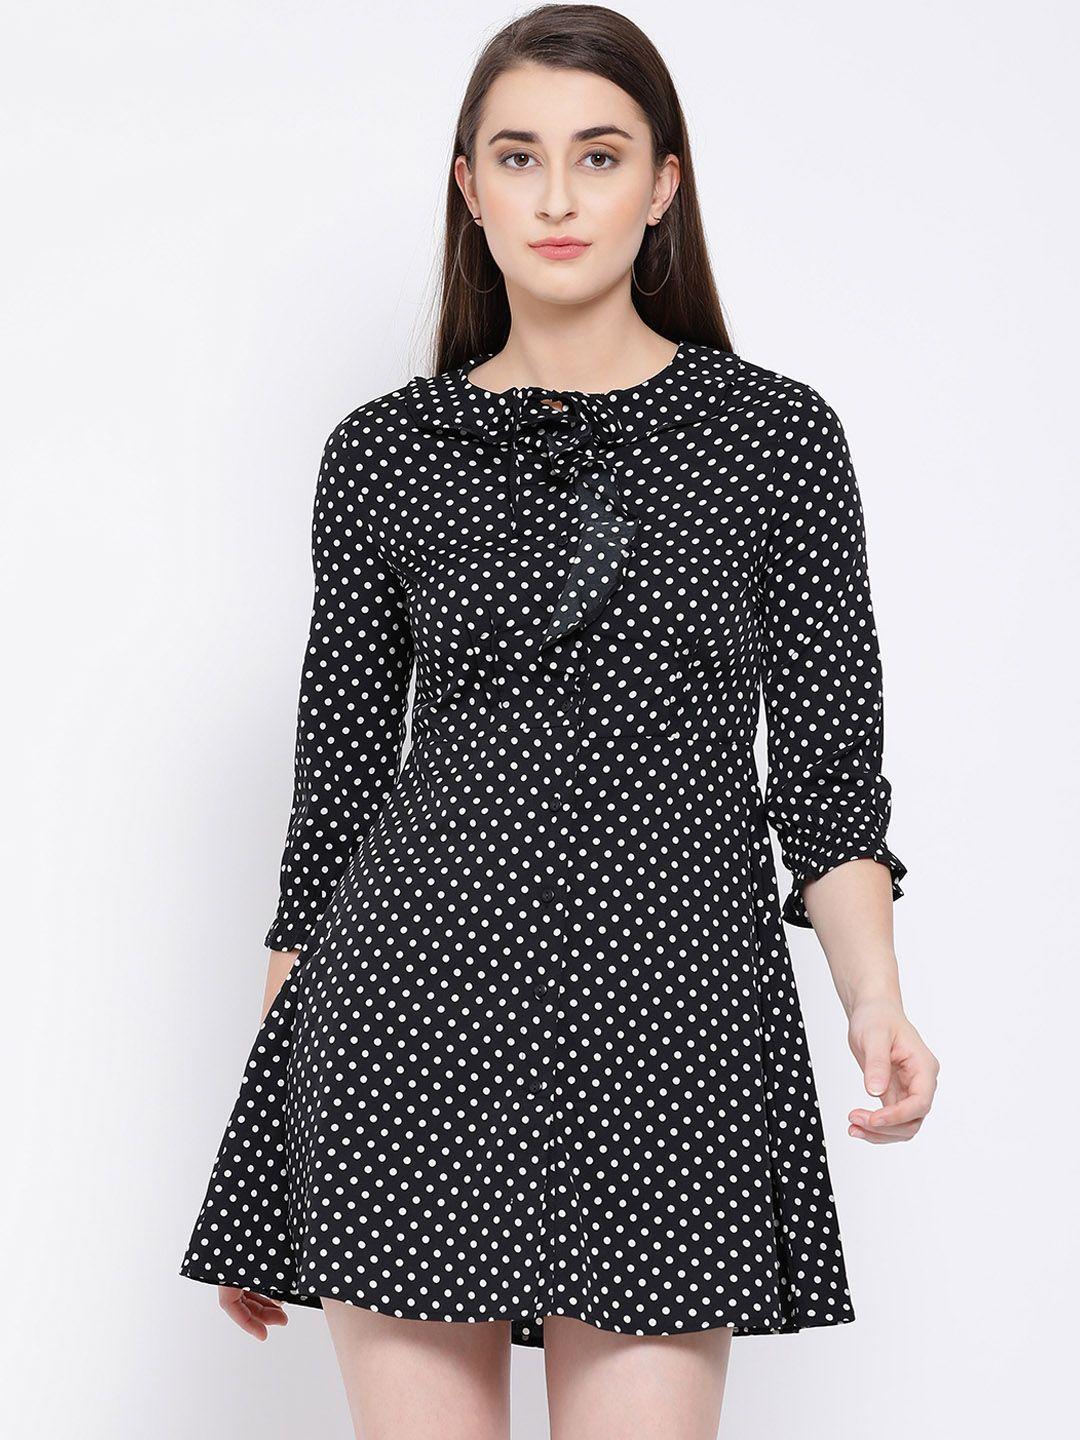 oxolloxo women printed black fit and flare dress